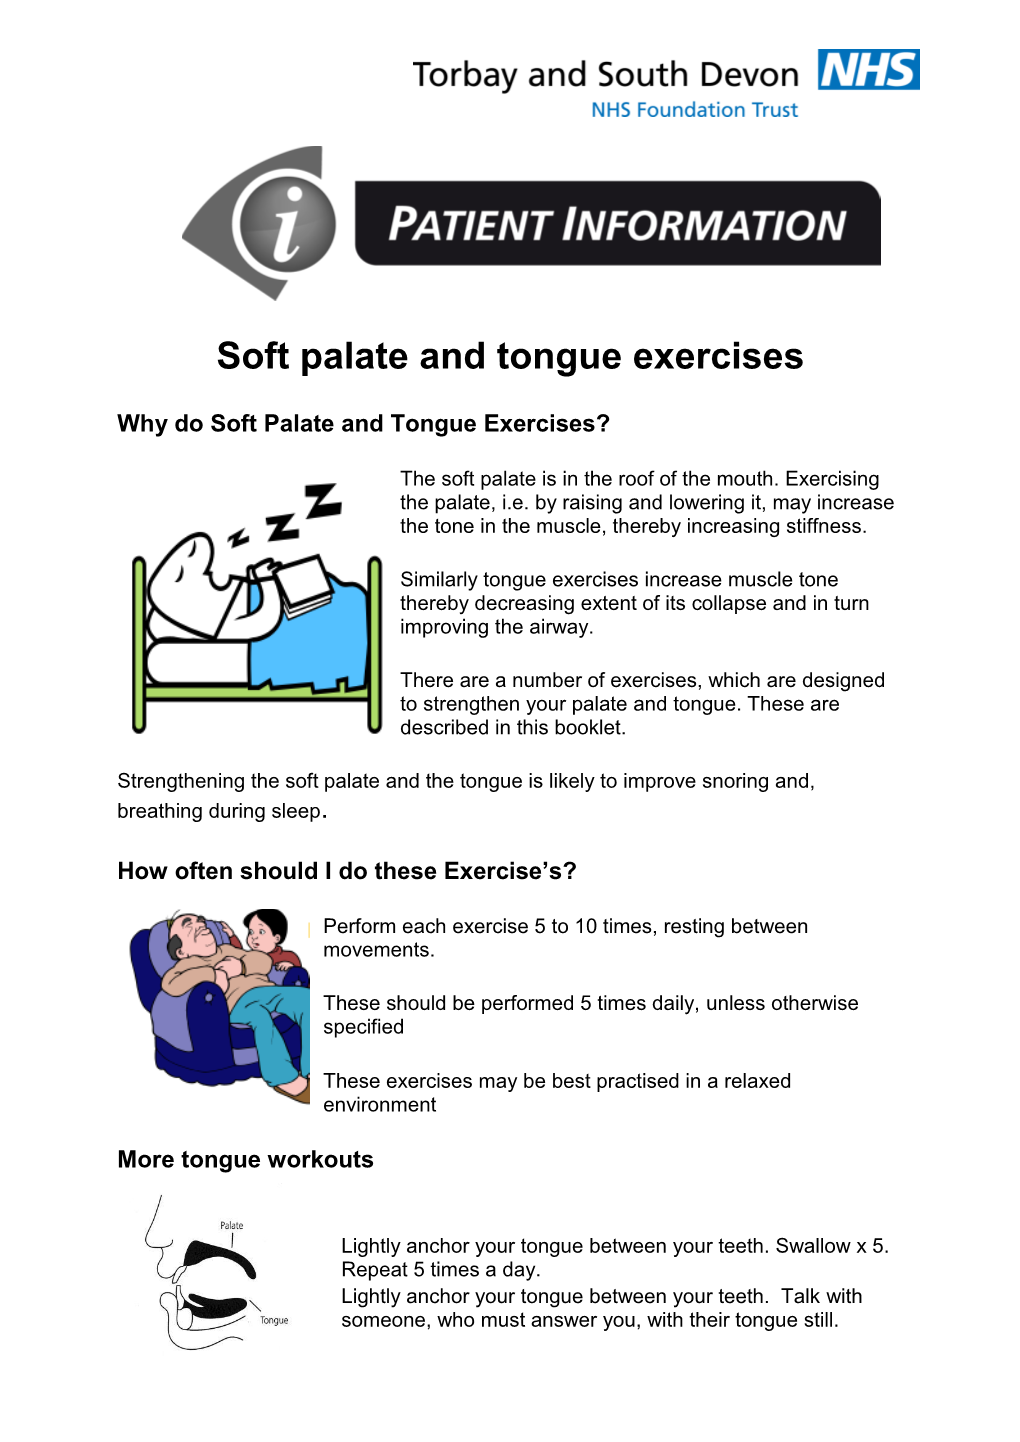 Soft Palate and Tongue Exercises